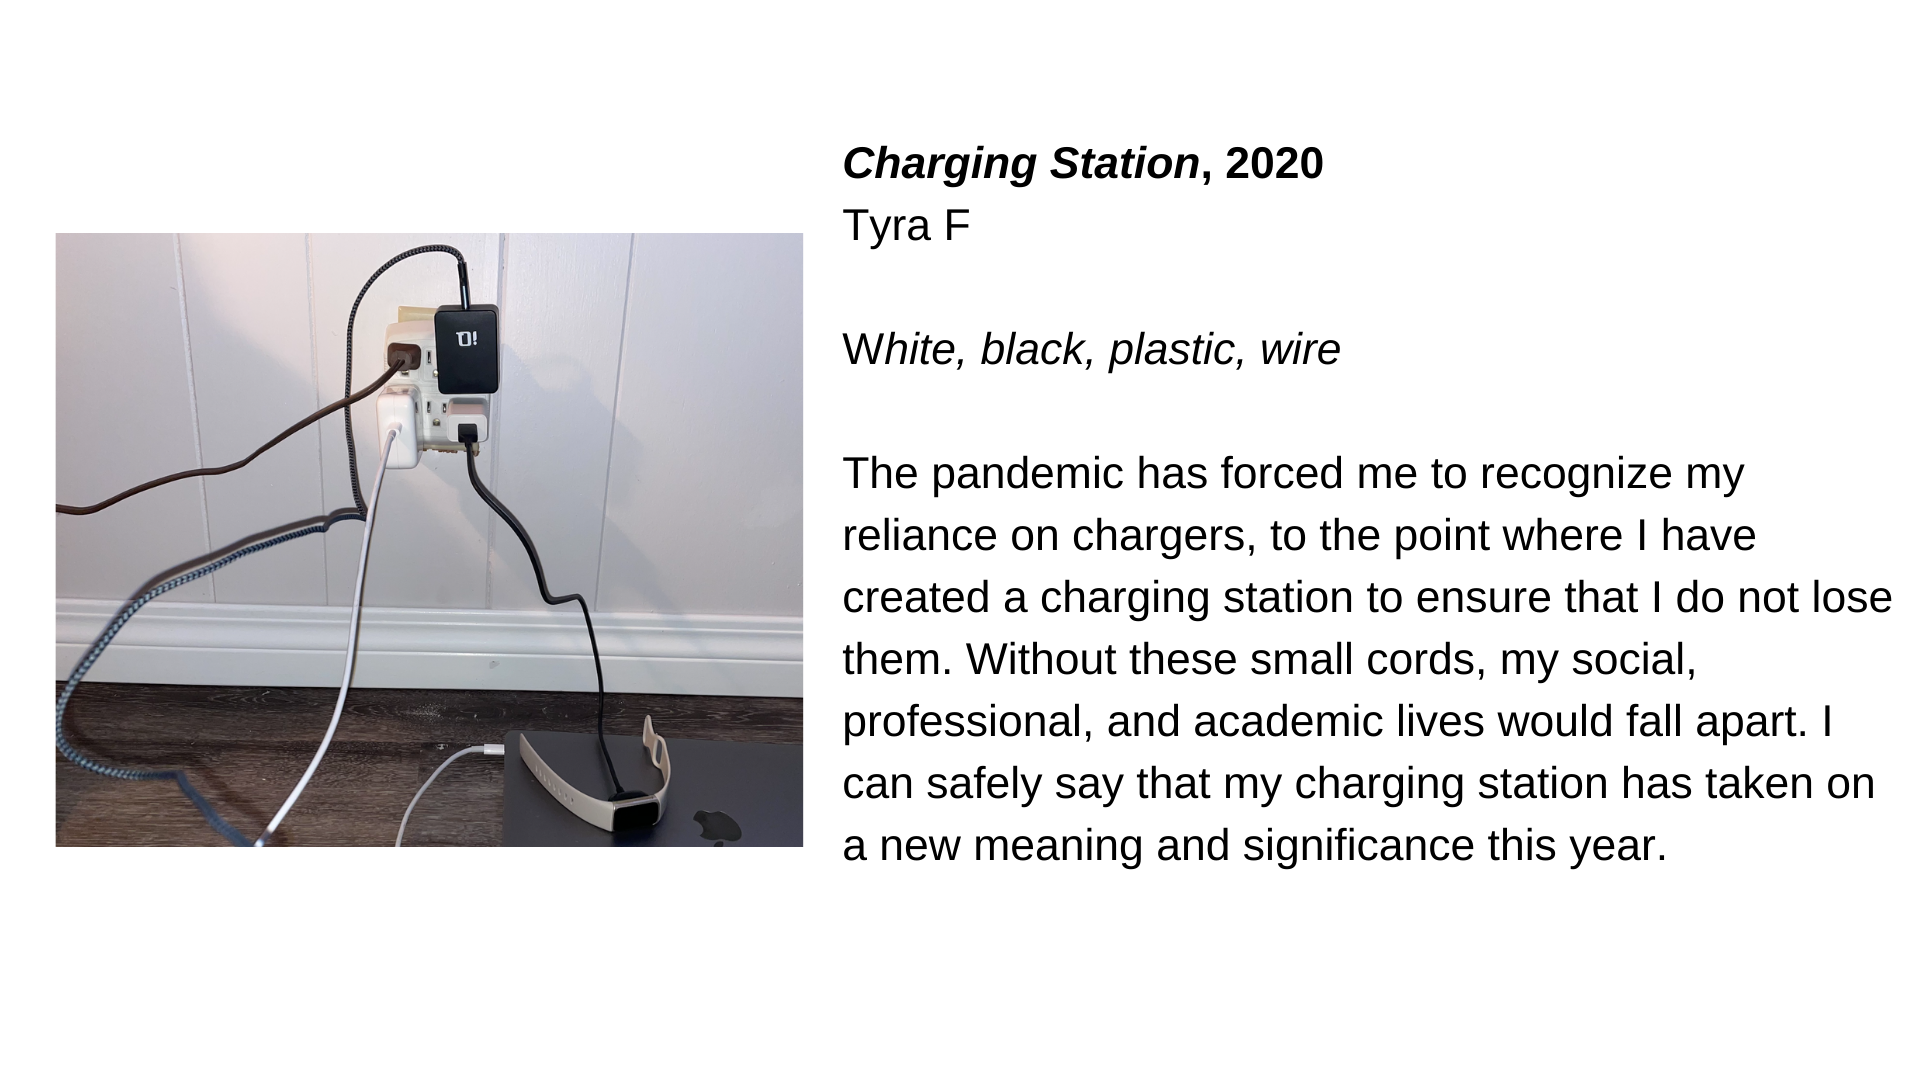  An image of several things plugged into an outlet next to the text, “Charging Station, 2020 - Tyra F. White, black, plastic, wire. The pandemic has forced me to recognize my reliance on chargers, to the point where I have created a charging station 